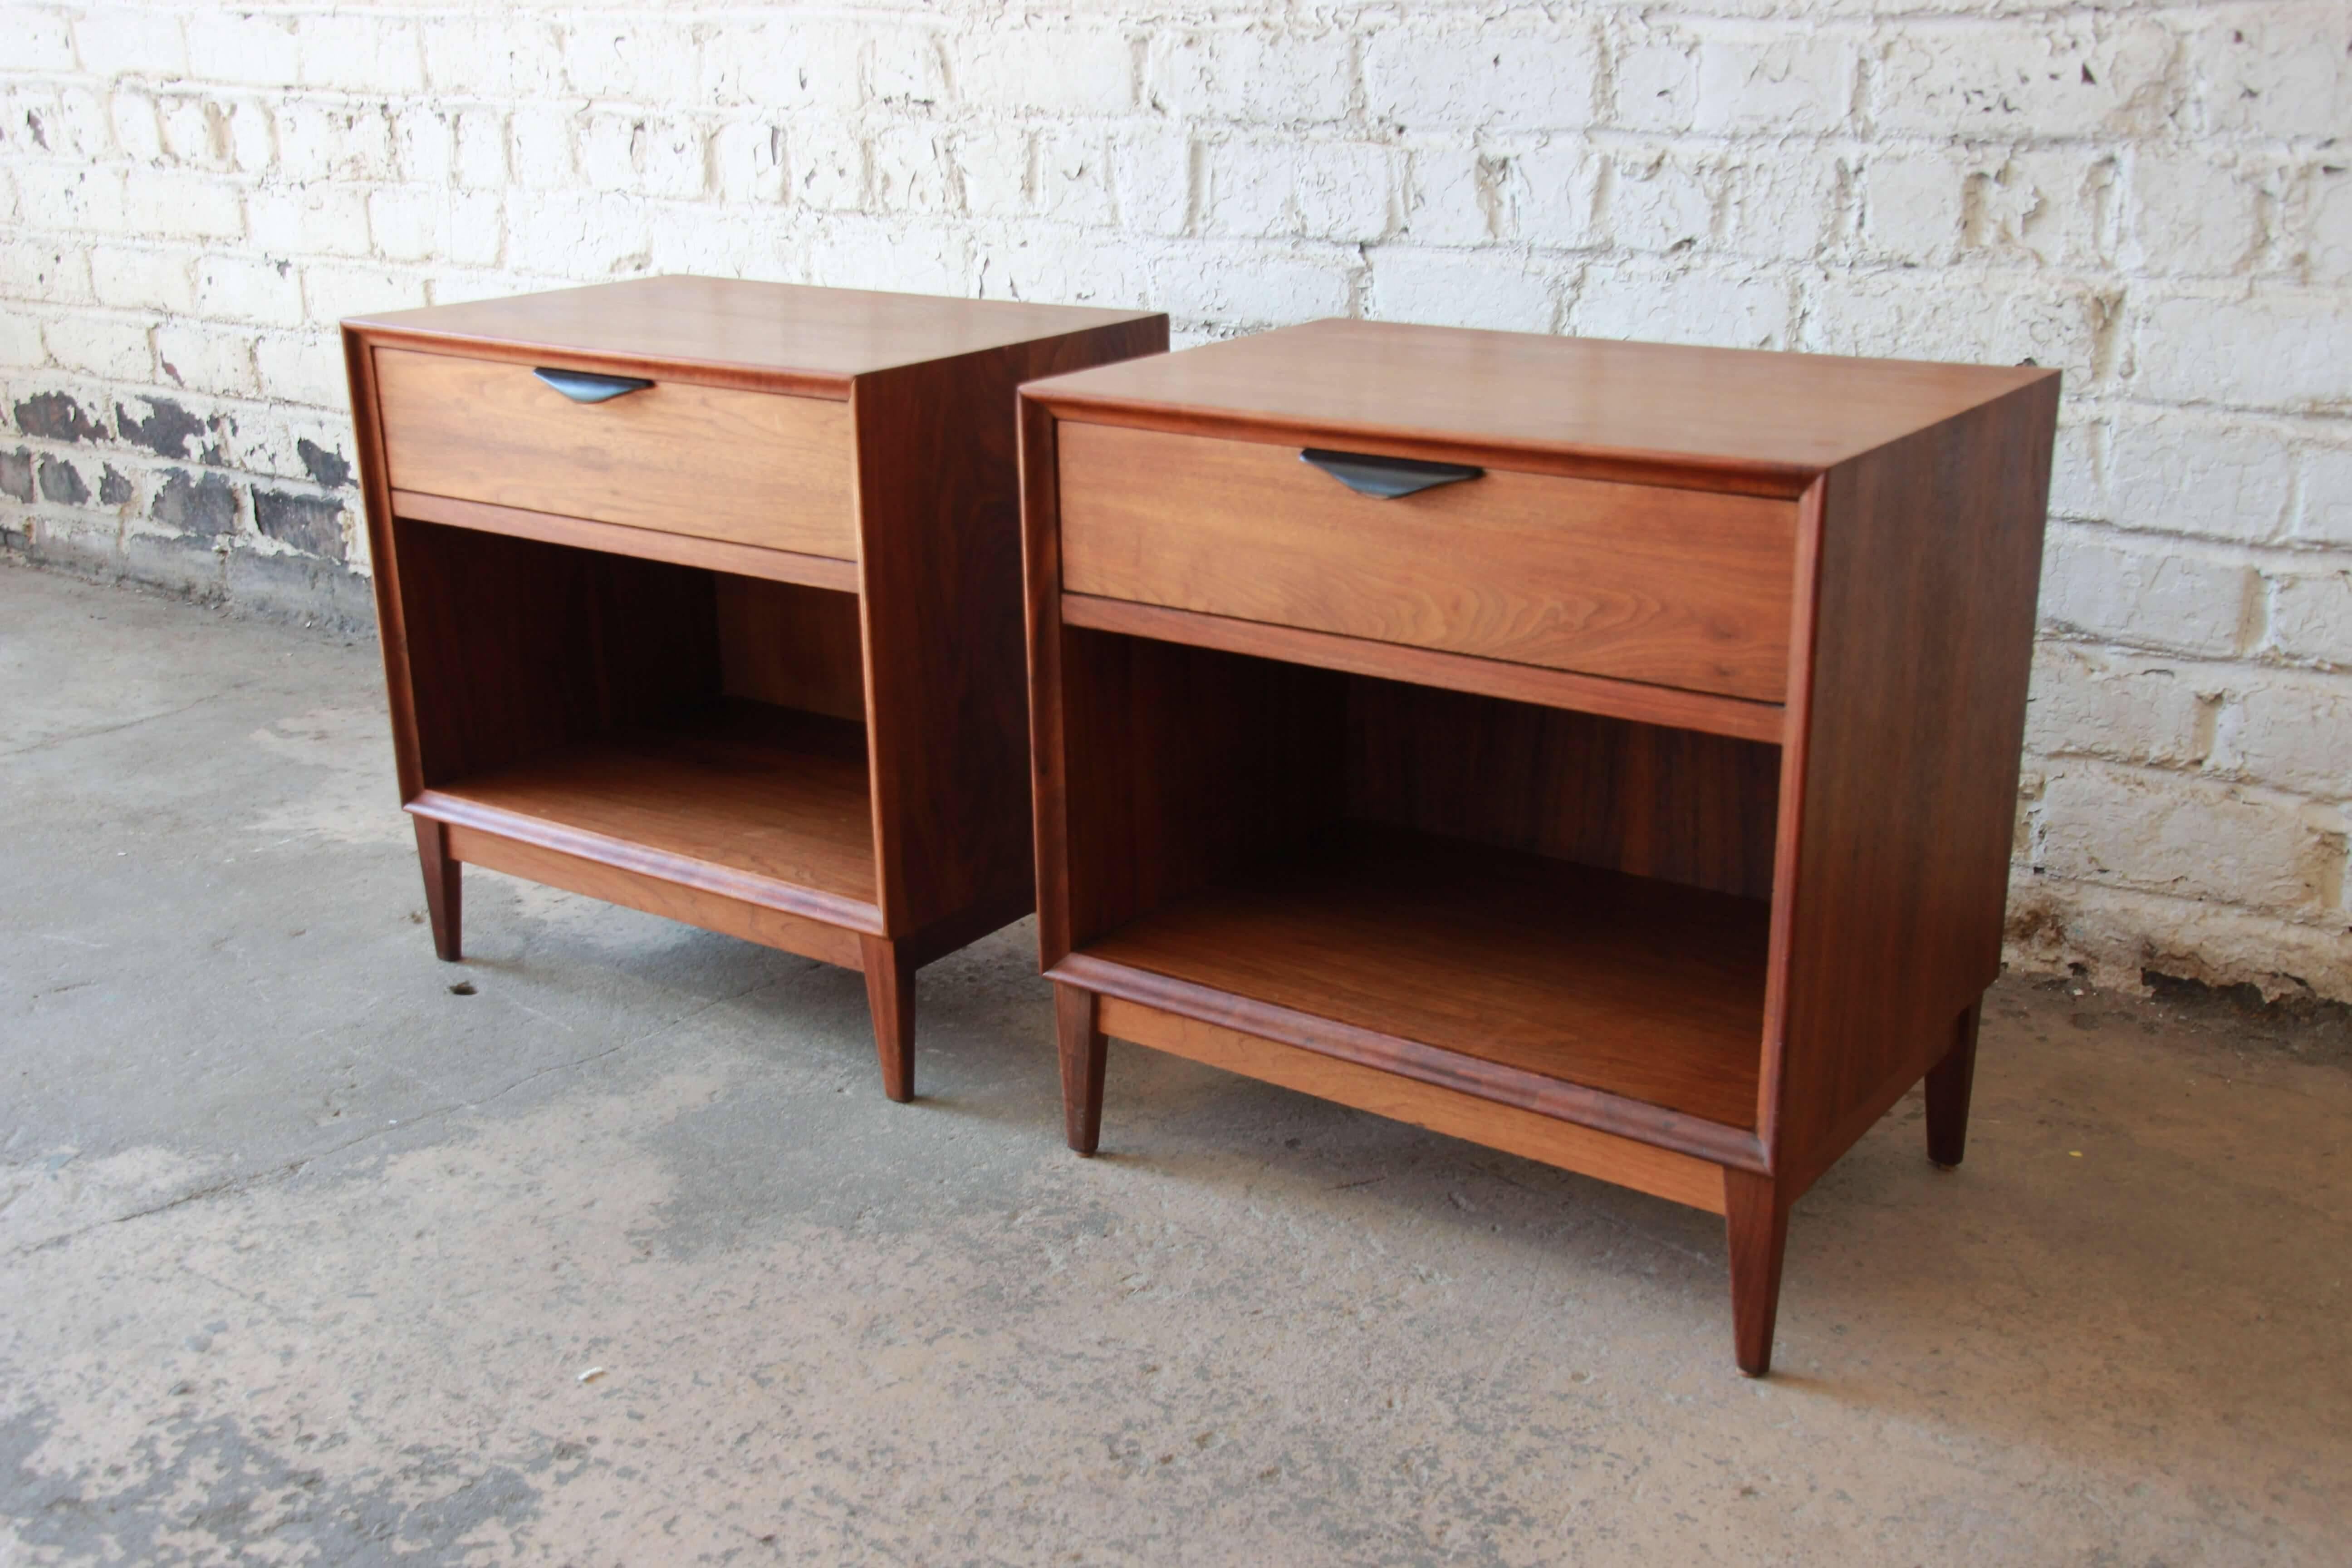 Offering a rare and exceptional pair of Mid-Century Modern nightstands by Dillingham. The pair of walnut nightstands have a Classic Mid-Century design with tapered legs leading up to a cabinet space for storage. The drawer has black lacquered pull